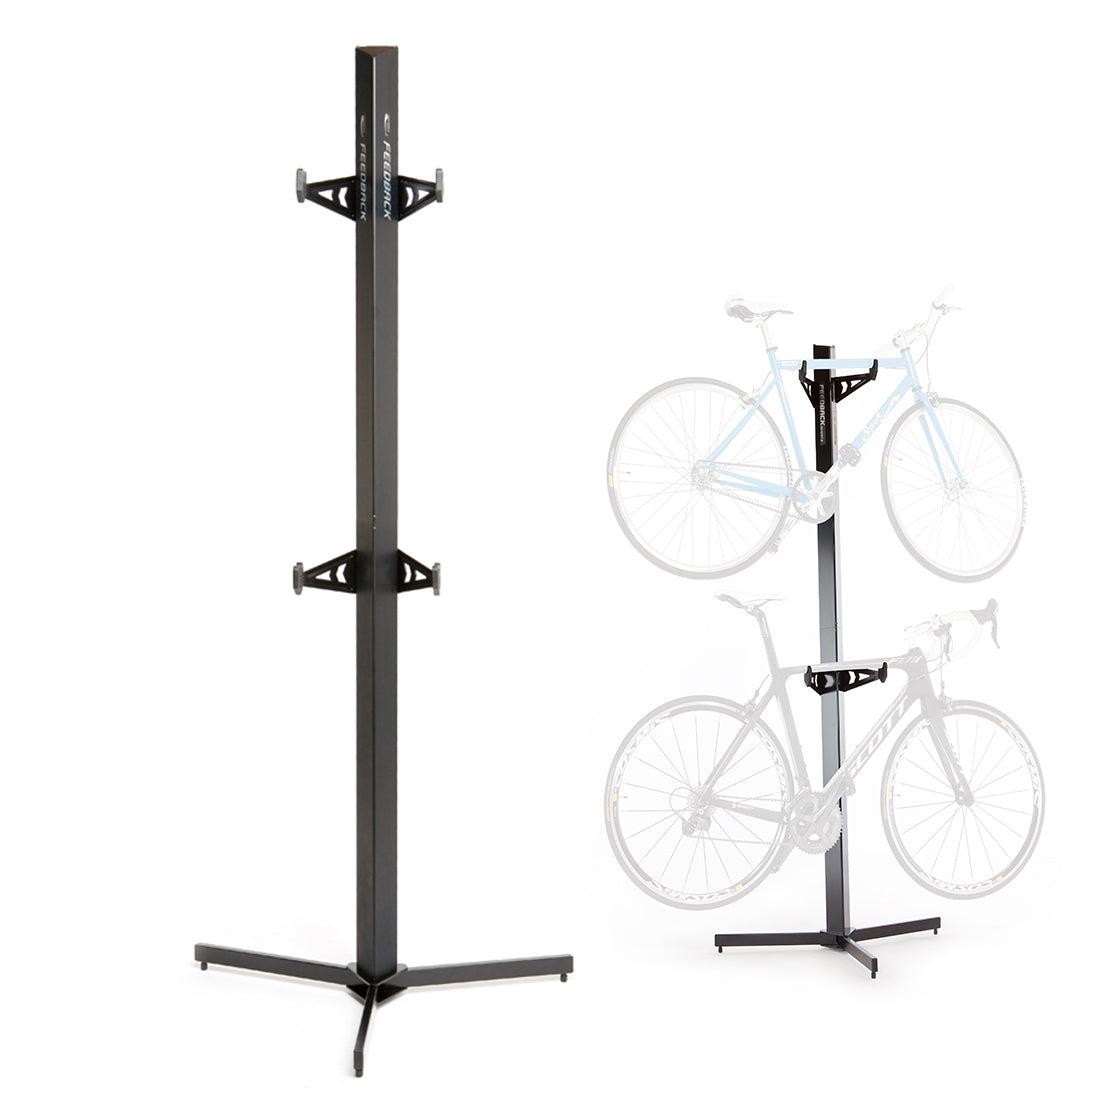 Feedback Sports Velo Cache vertical bike storage stand in studio on white not in use. next to one in use with ghosted bikes.